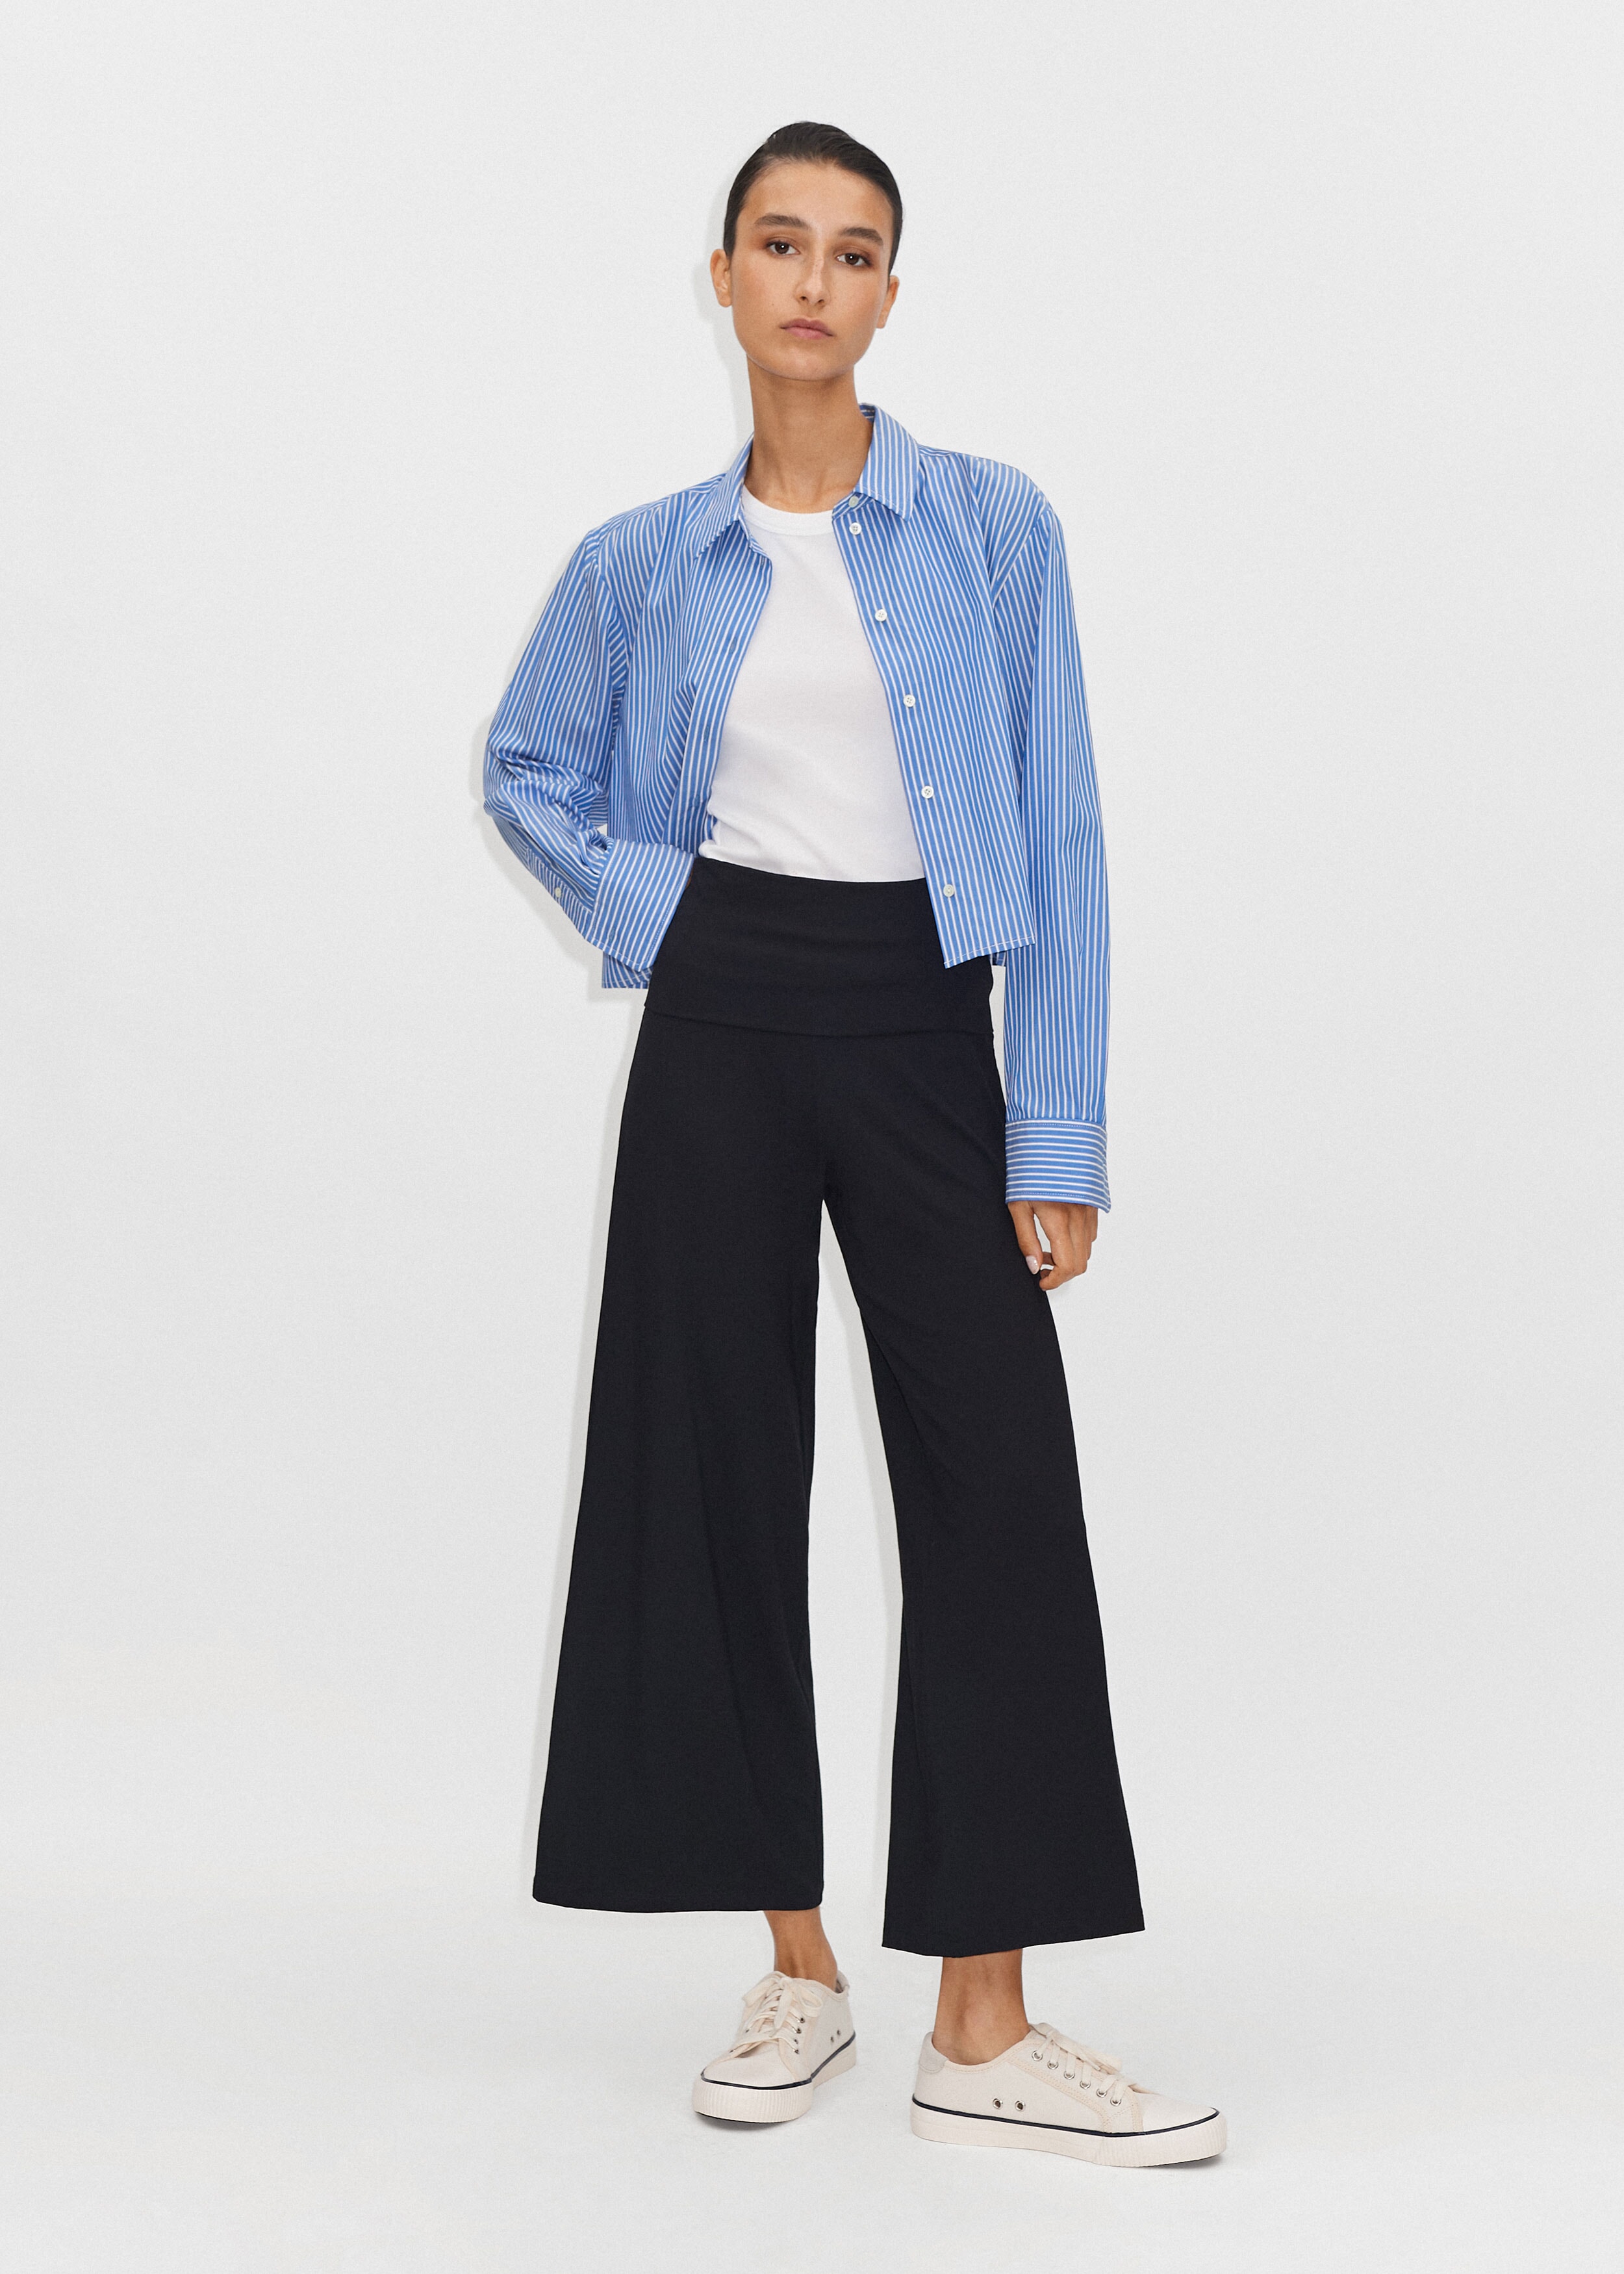 New In Clothing - Women’s SS22 Fashion | ME+EM